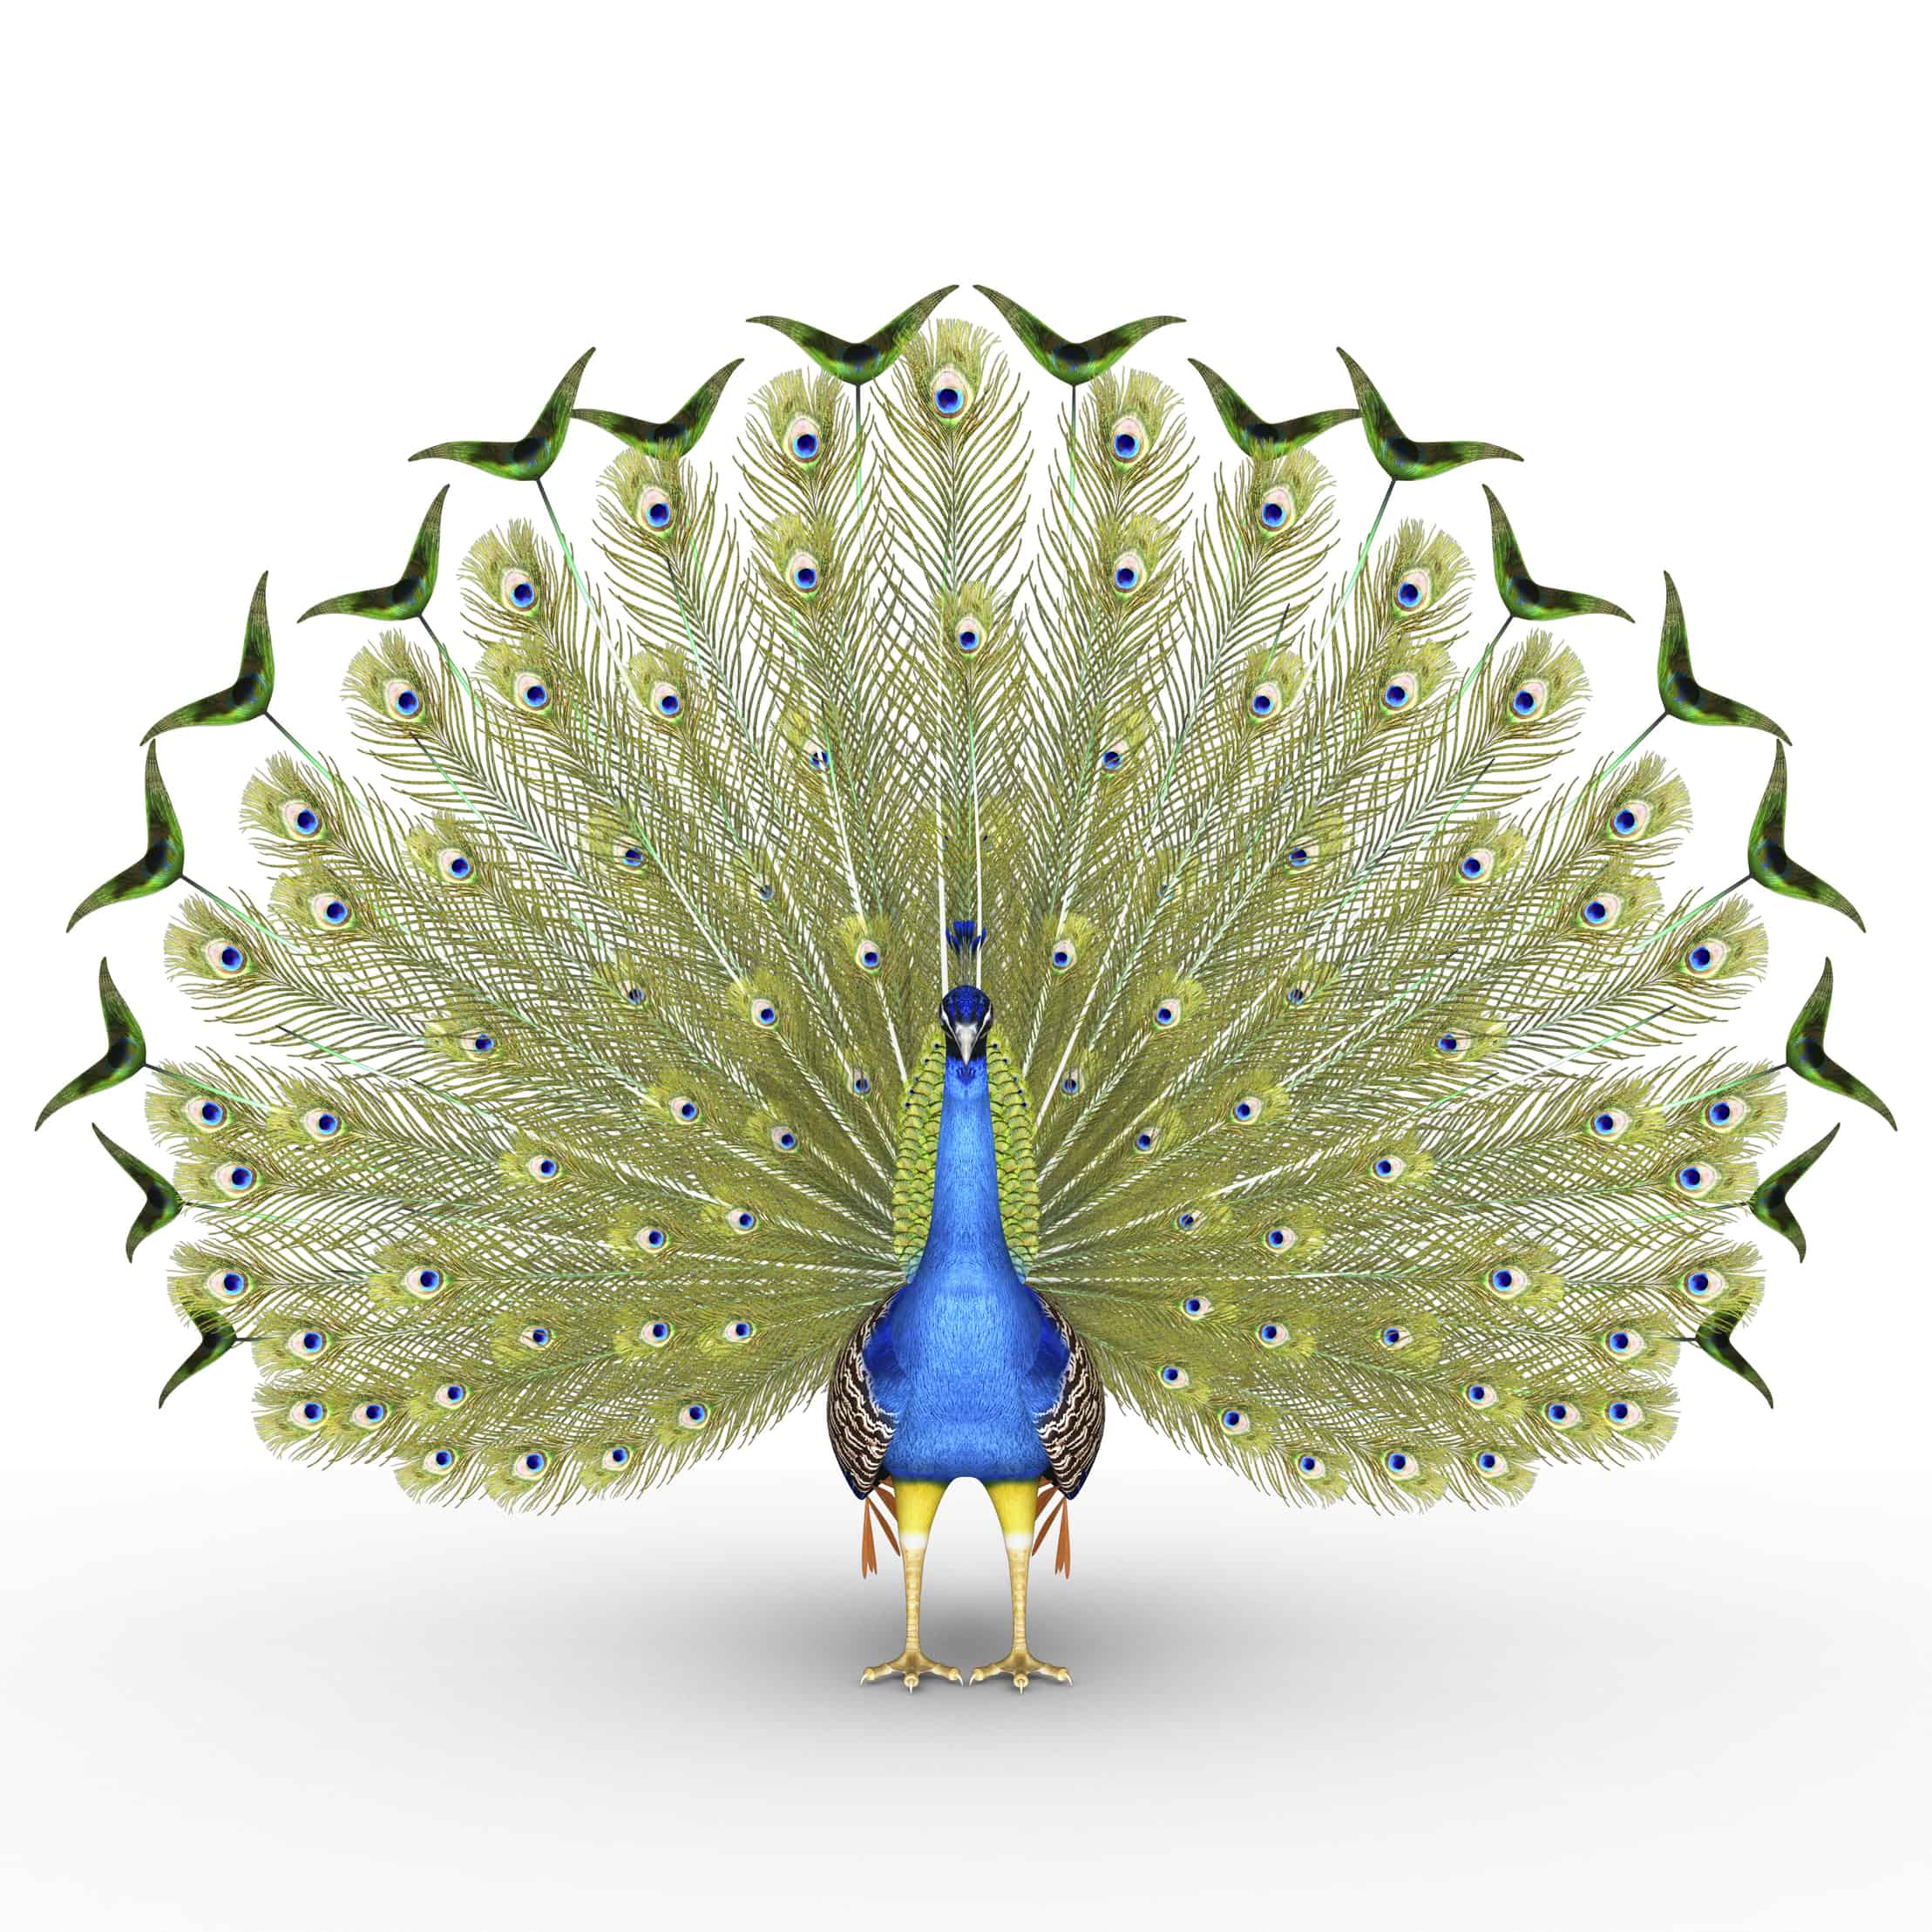 Fulfillment centers can ship delicate products like this peacock sculpture